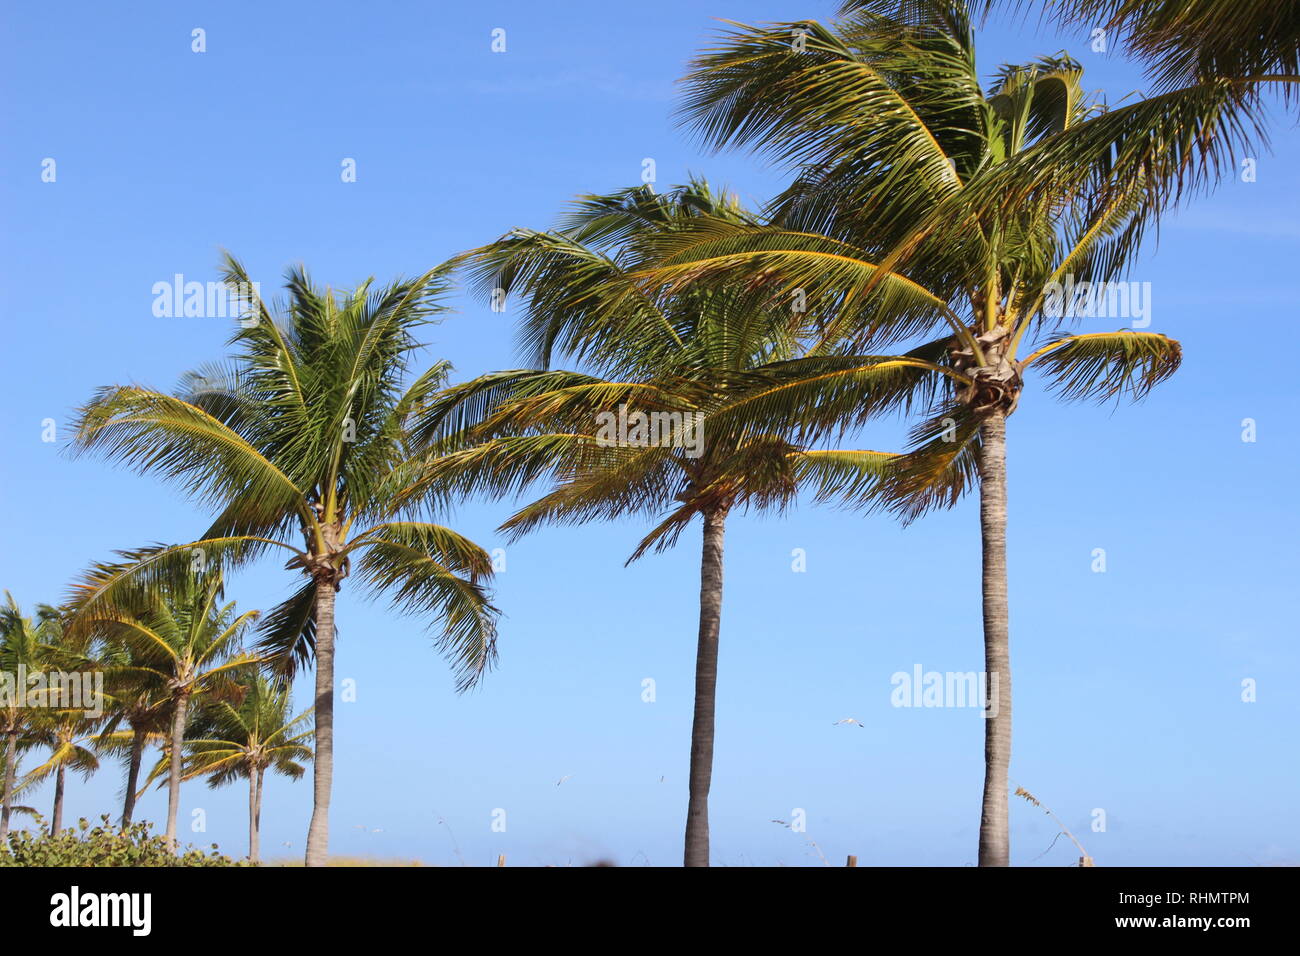 All beach themed in Florida's Fort Lauderdale beach. Stock Photo